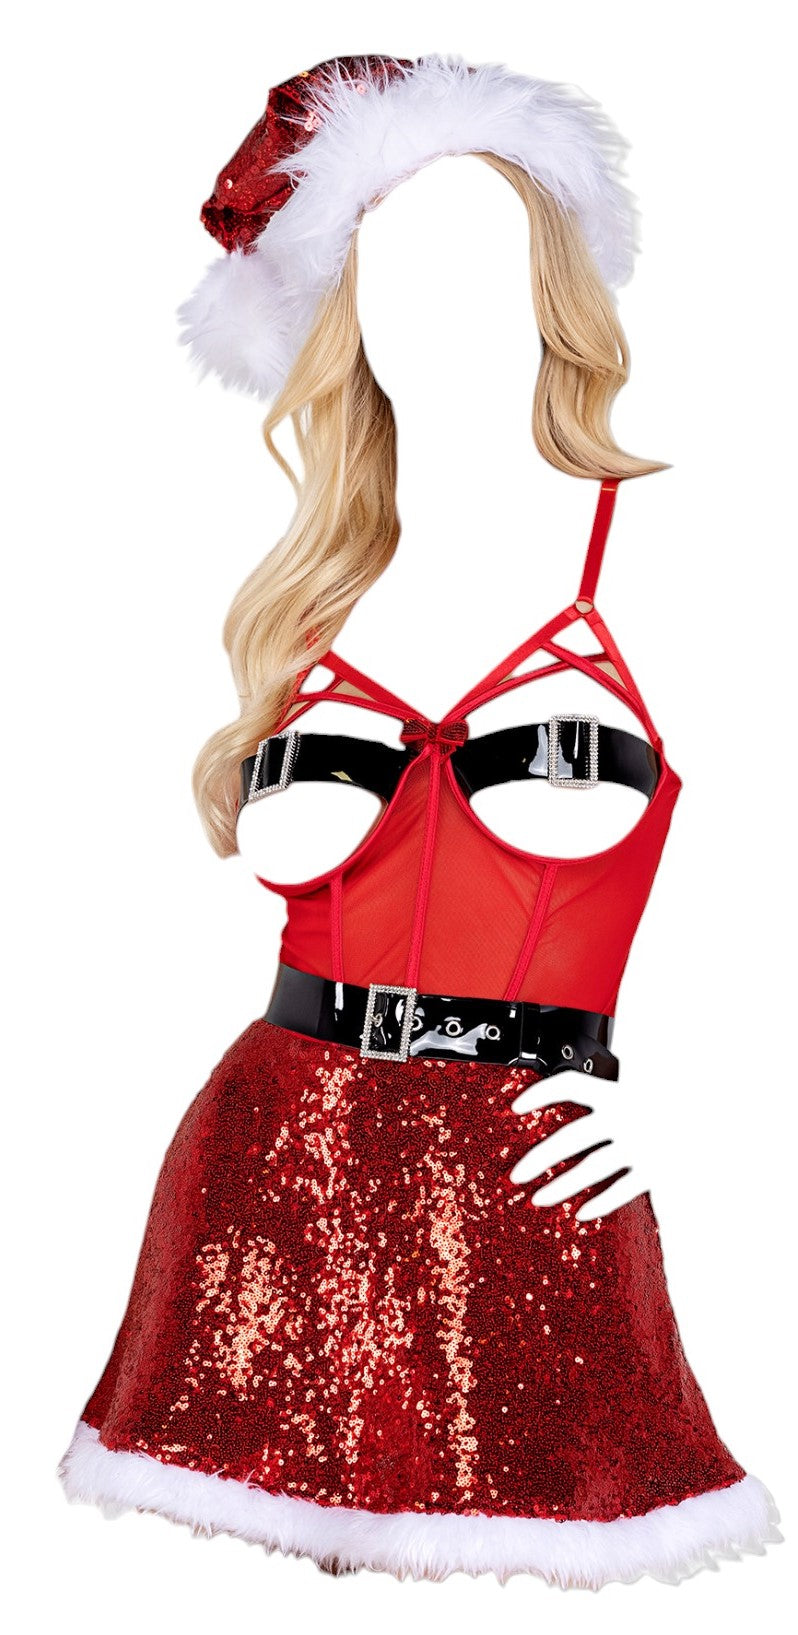 Roma Costume Sexy Miss Claus Boob Cutout Corset & Sequin Skirt Costume Red/Black/White